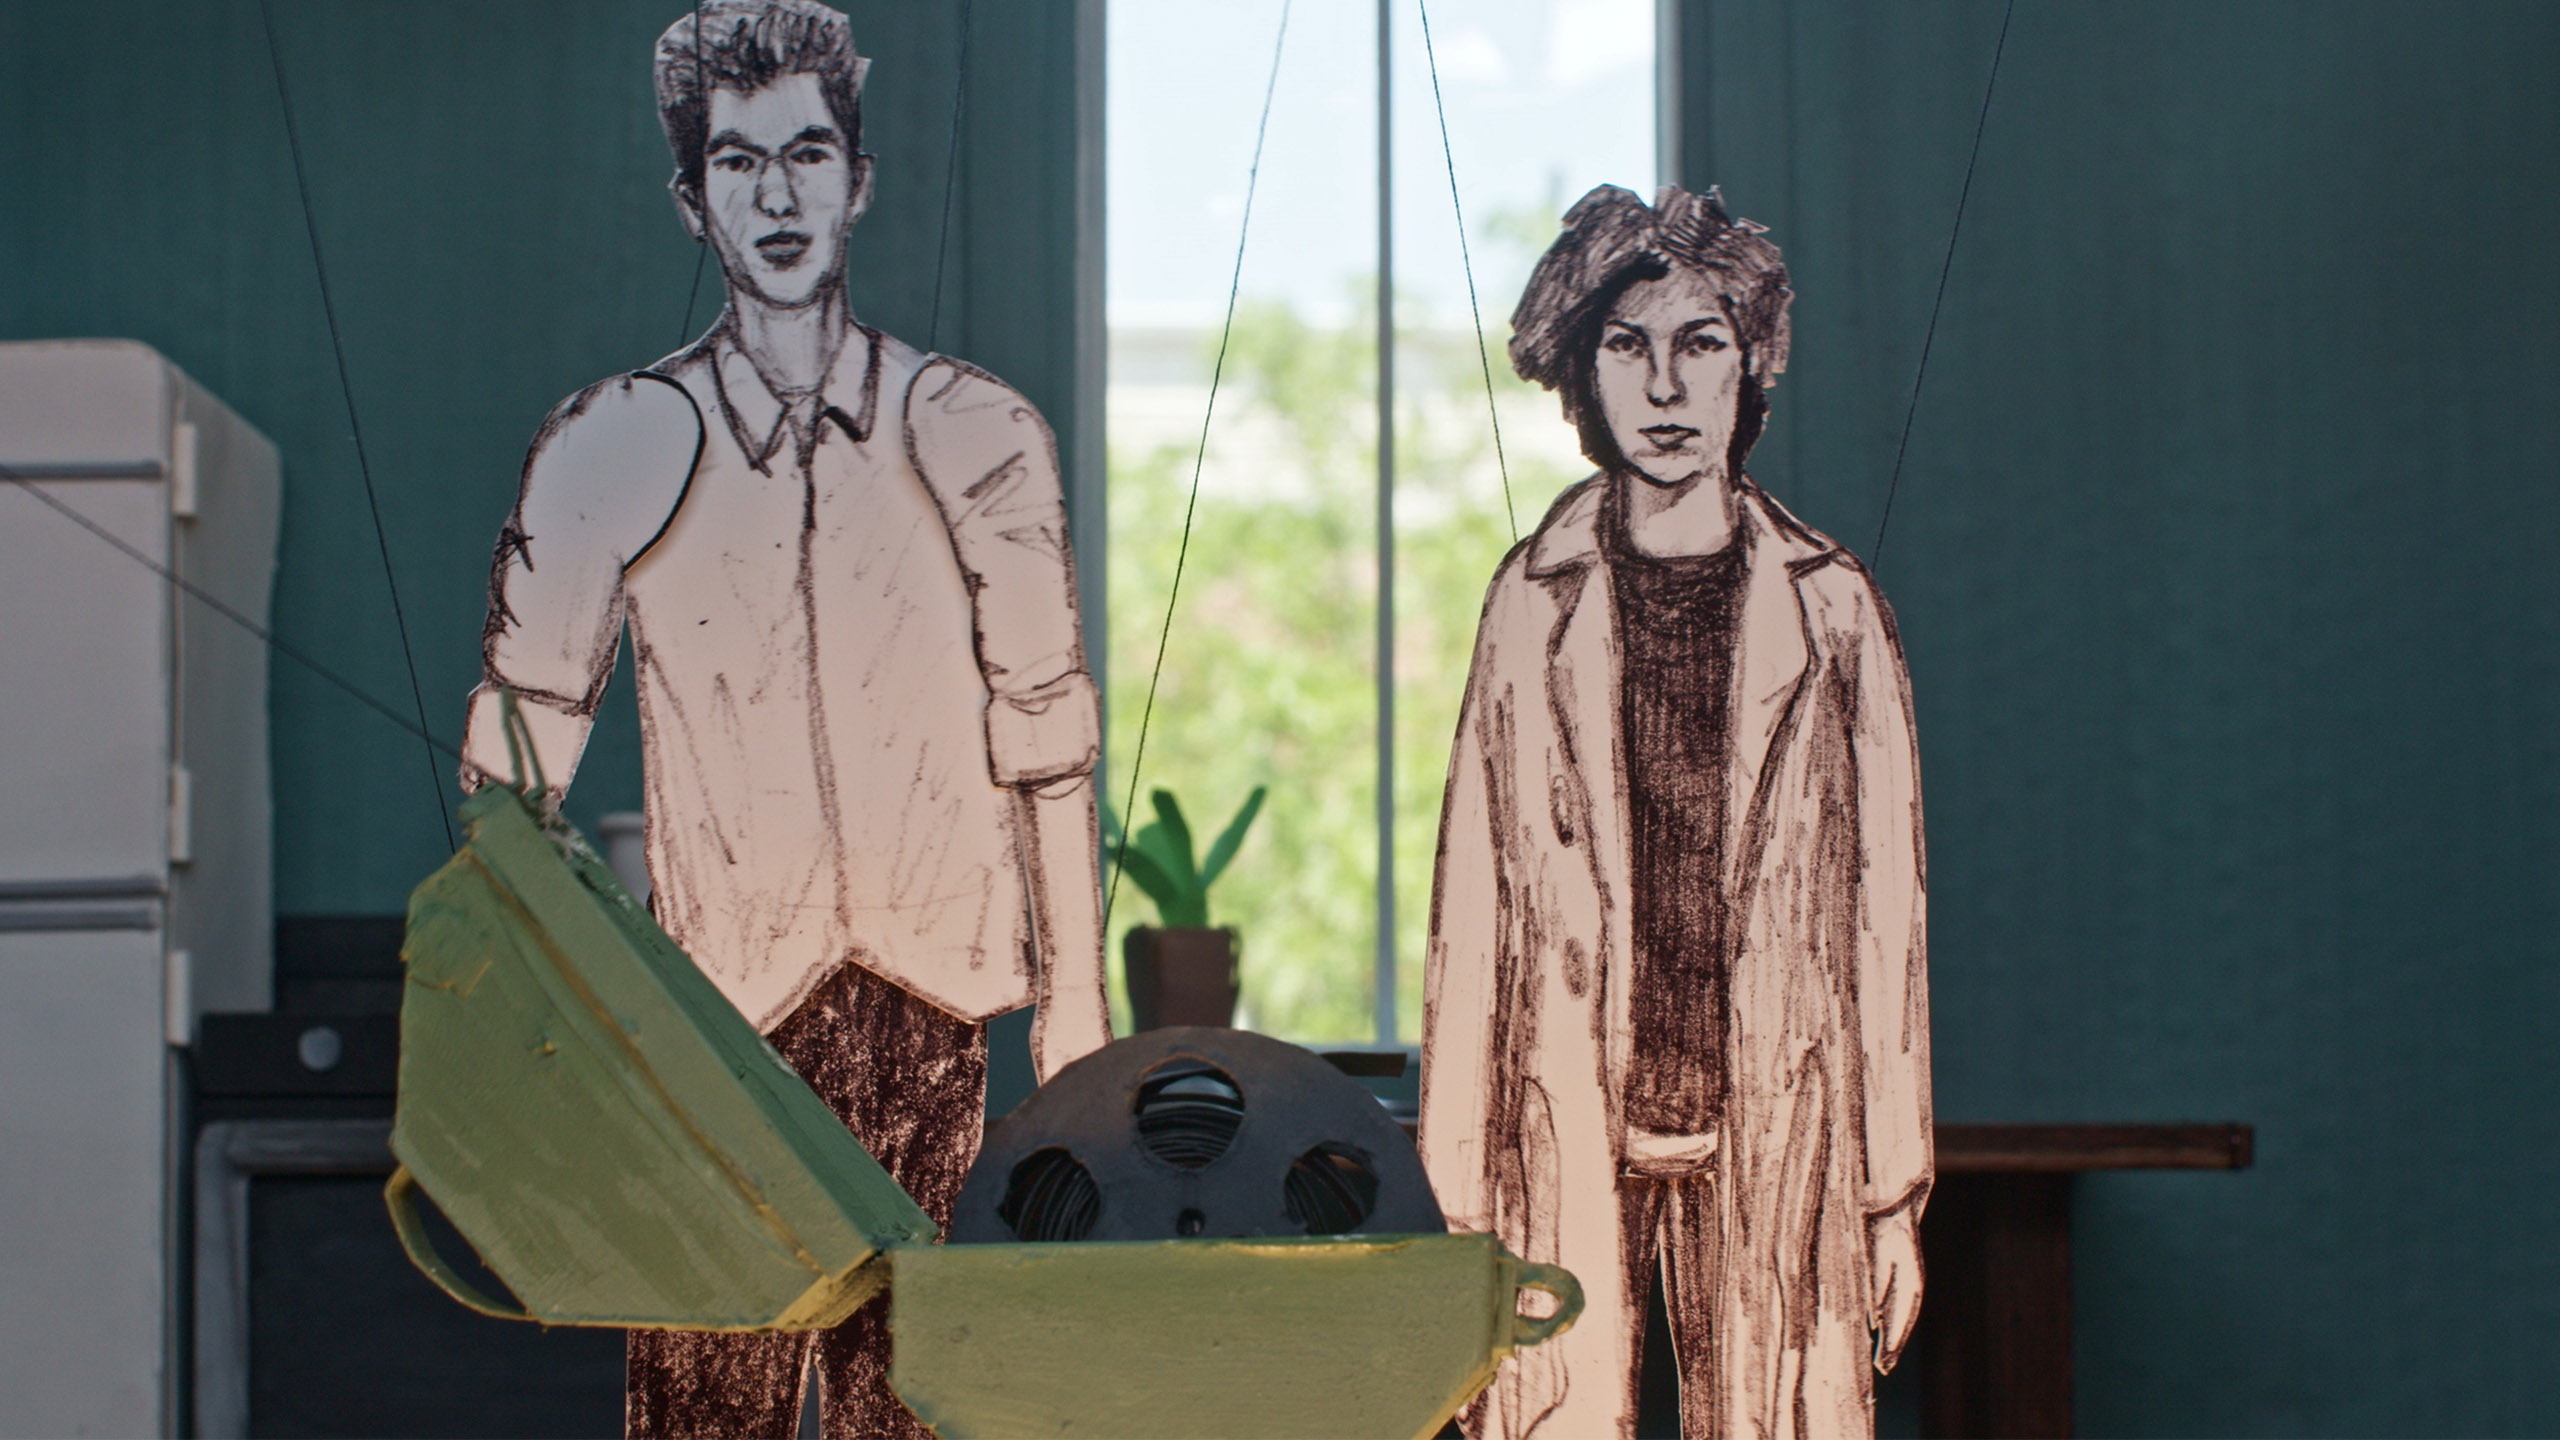 paper cut outs of two people in a room looking towards an open chest